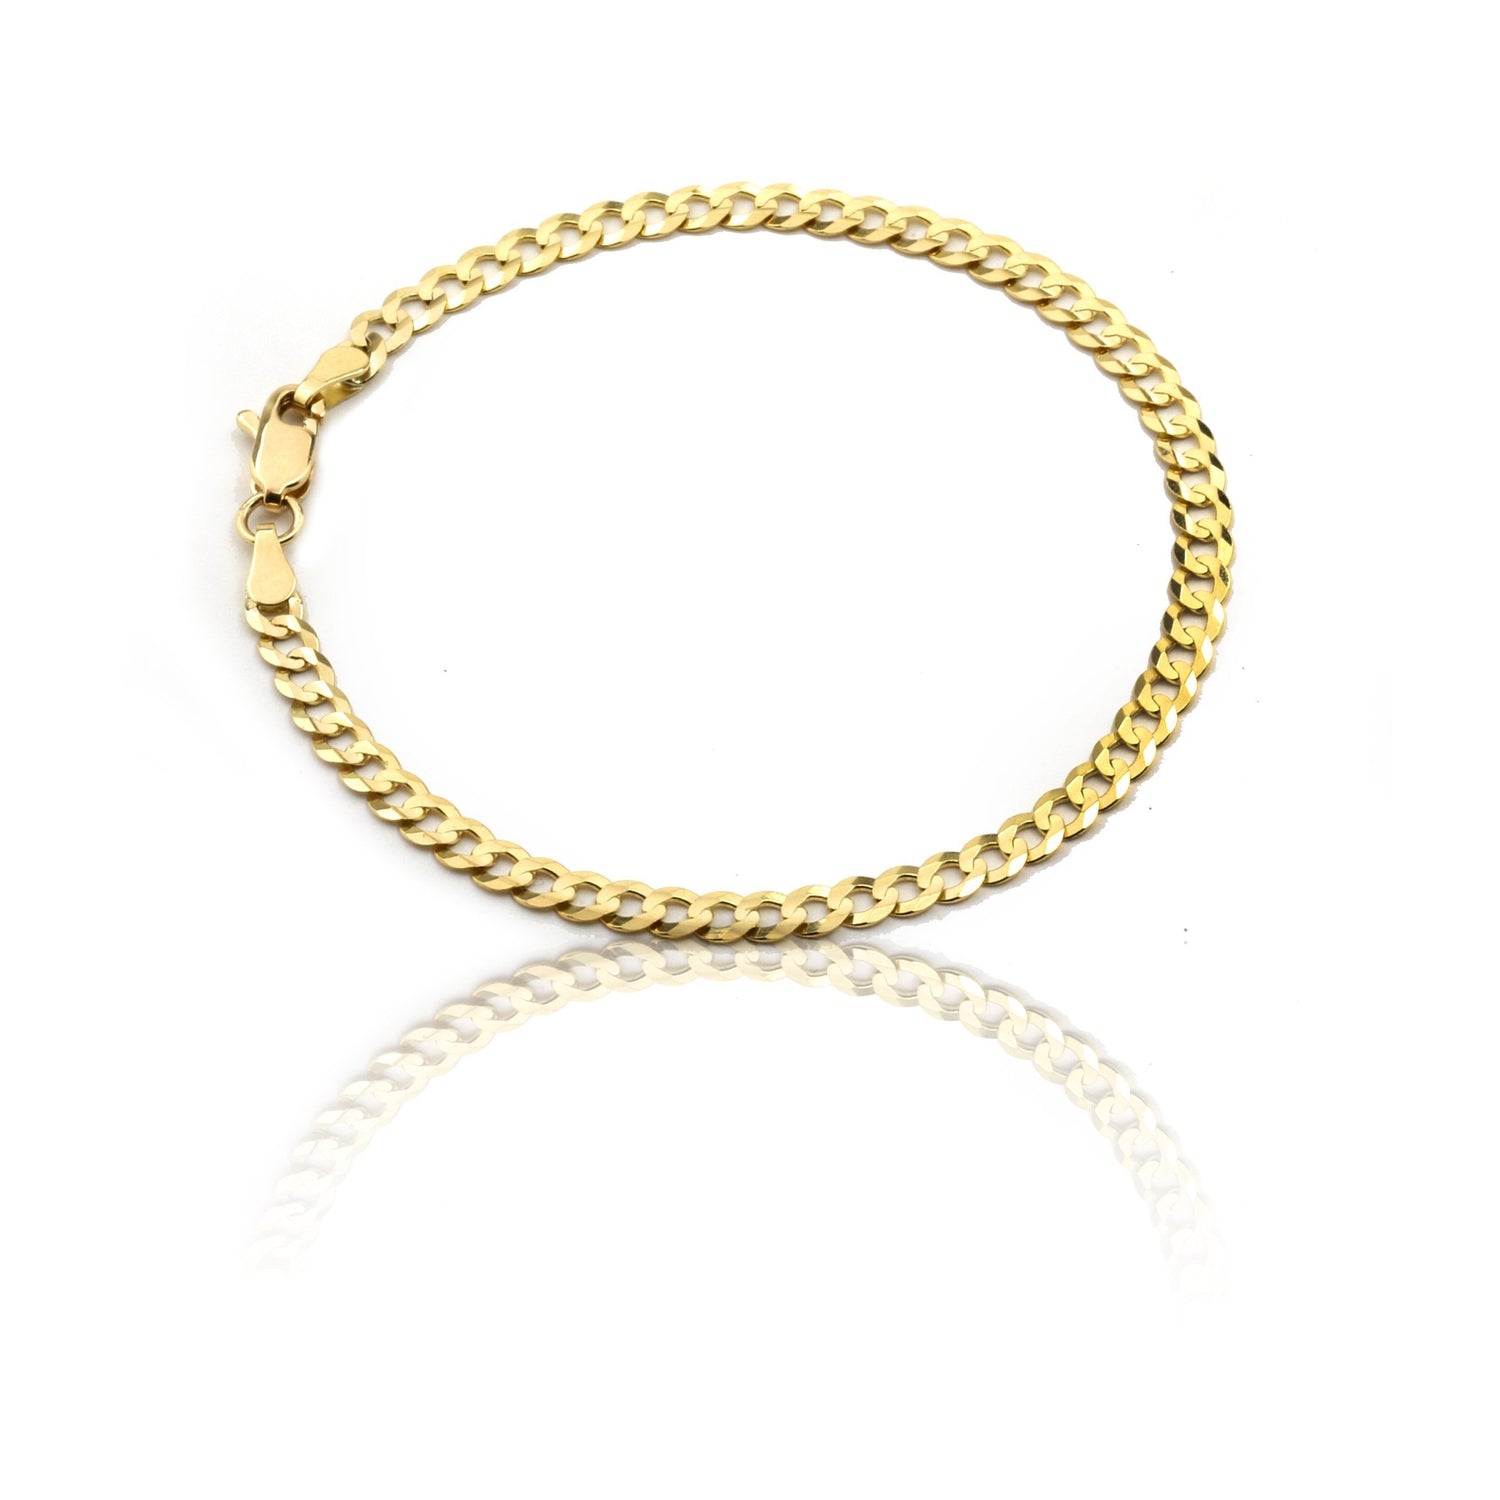 10k Fine Gold Curb Cuban Chain Bracelet and Anklet, 0.16 Inch (4mm) (All Sizes)